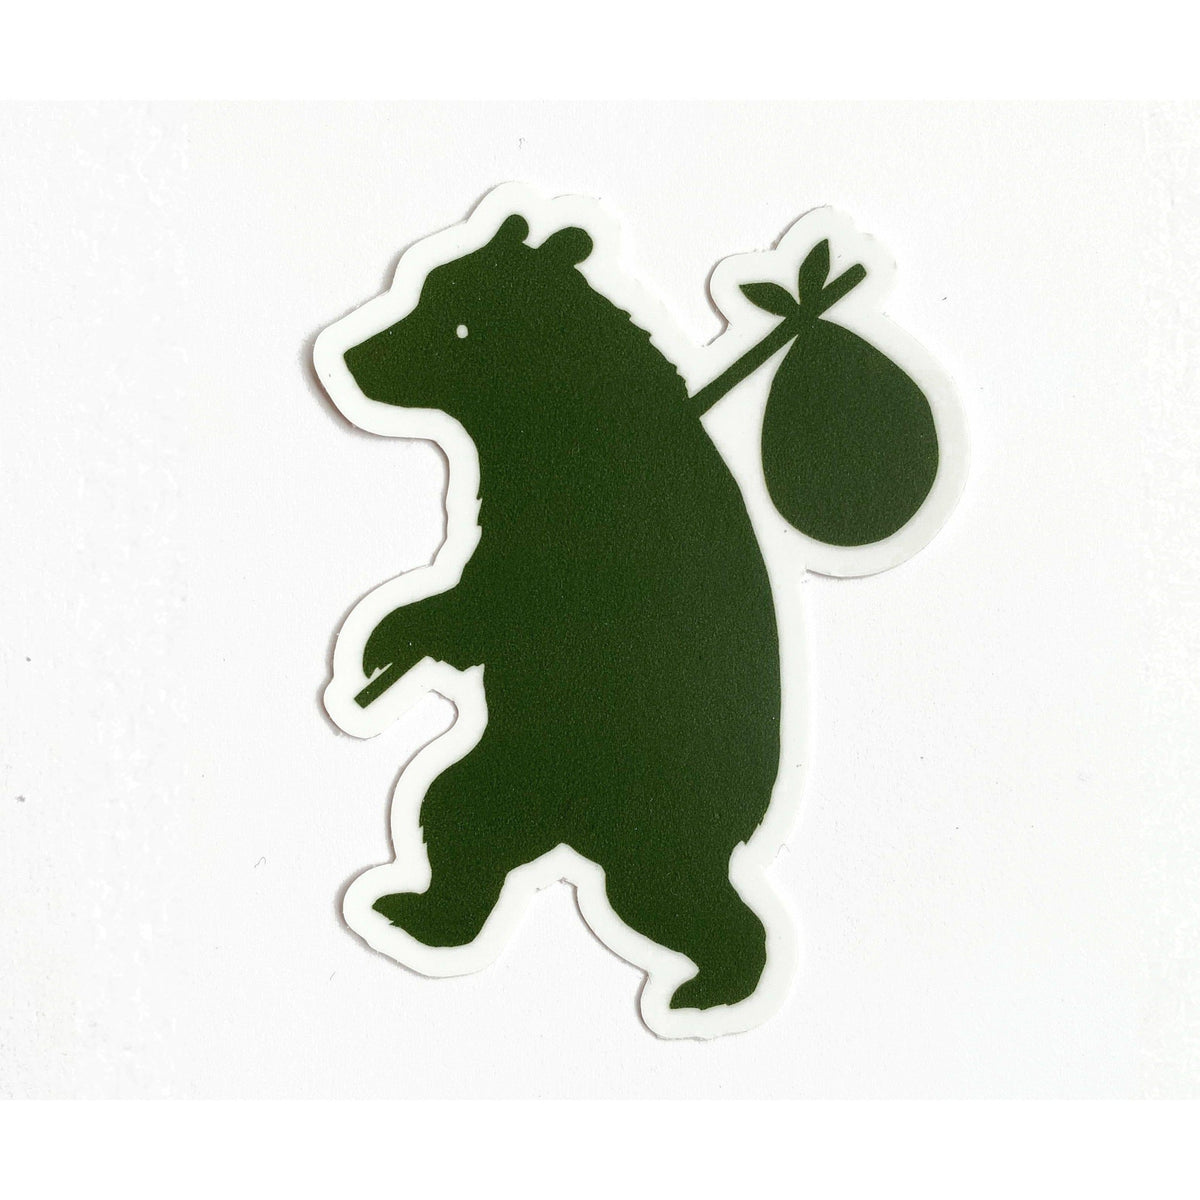 A Wander Bear Sticker with The Wild Wander on it.